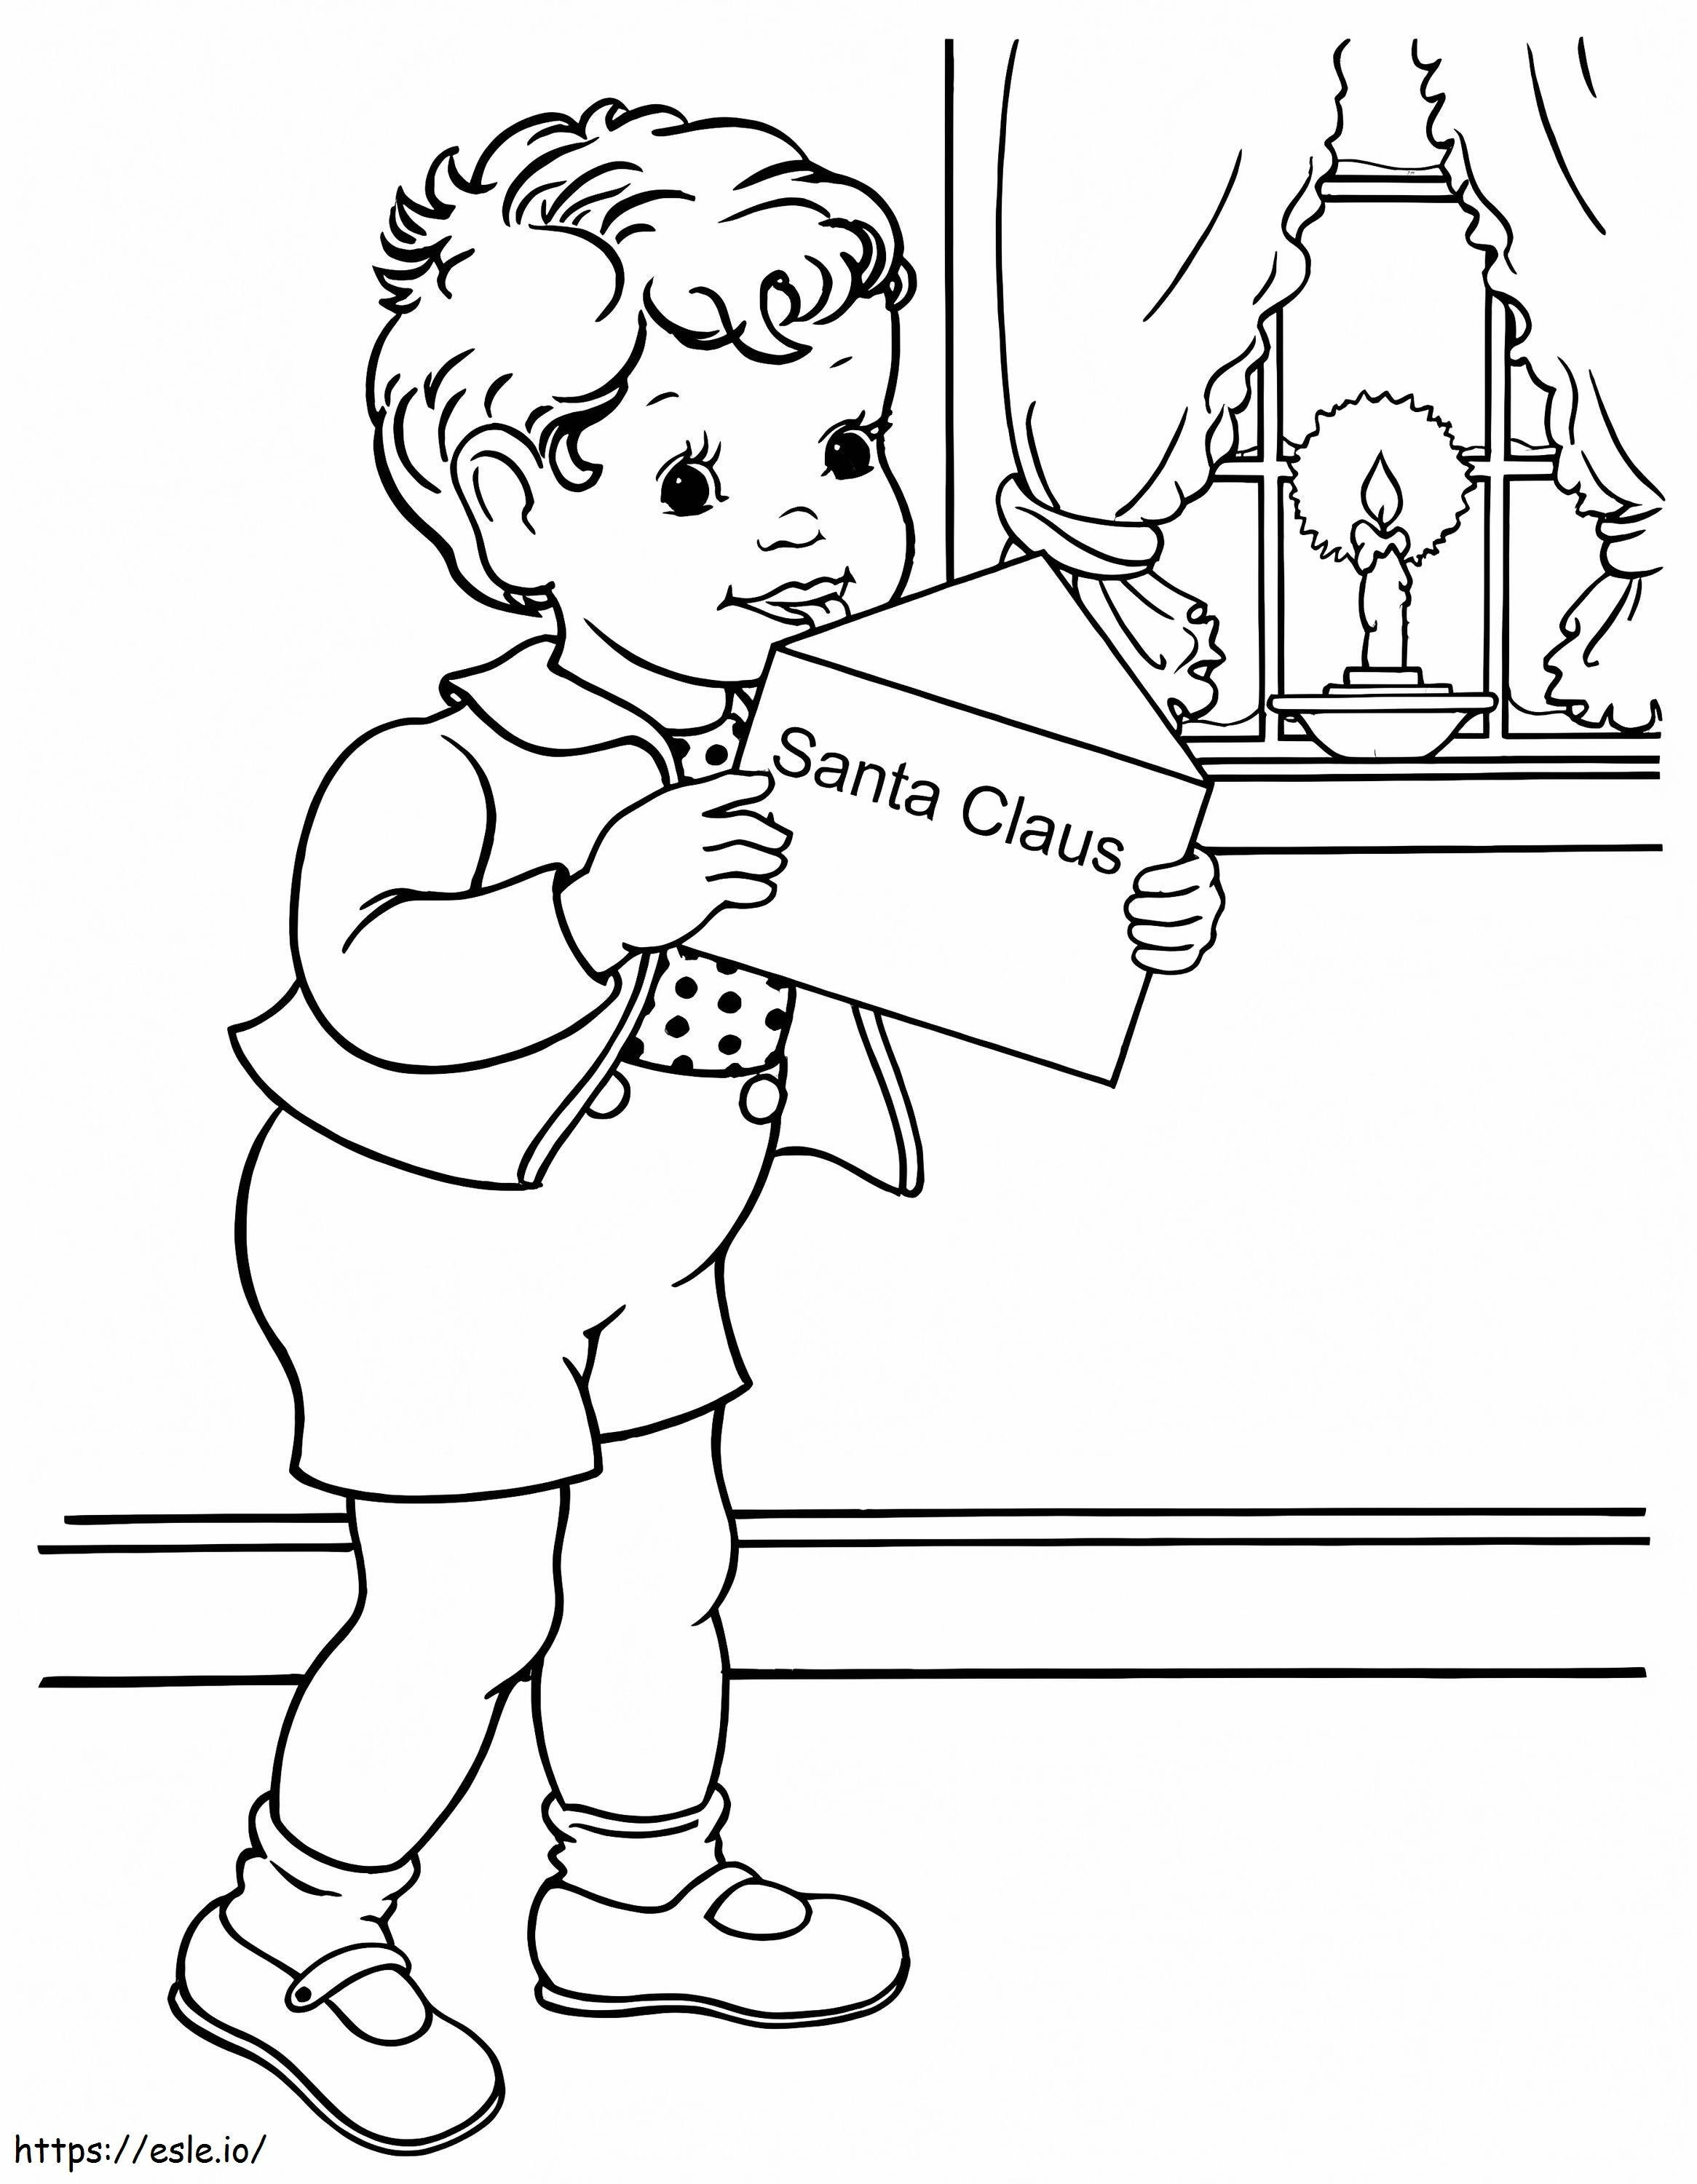 Boy Writing A Letter To Santa Claus coloring page